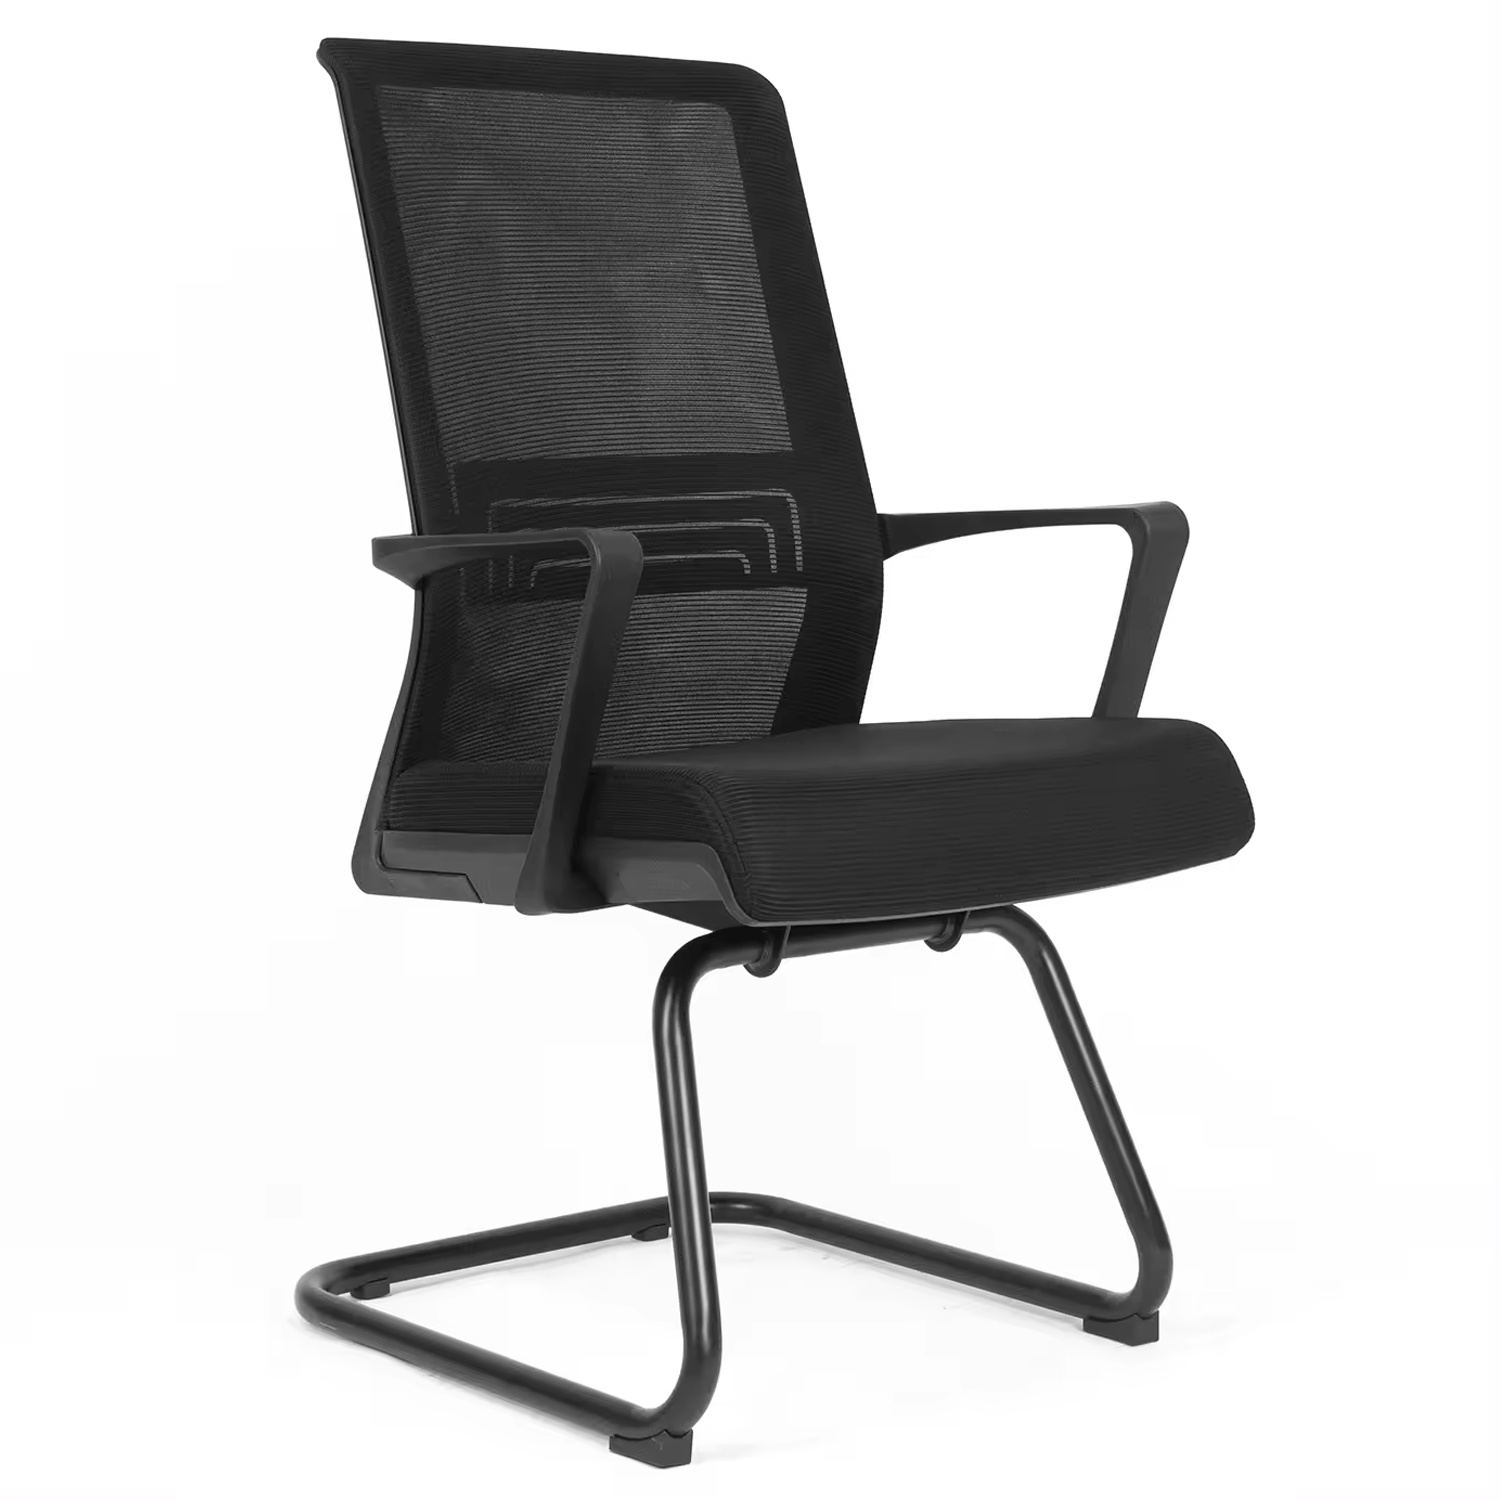 K1-BV-01 Small space office chair